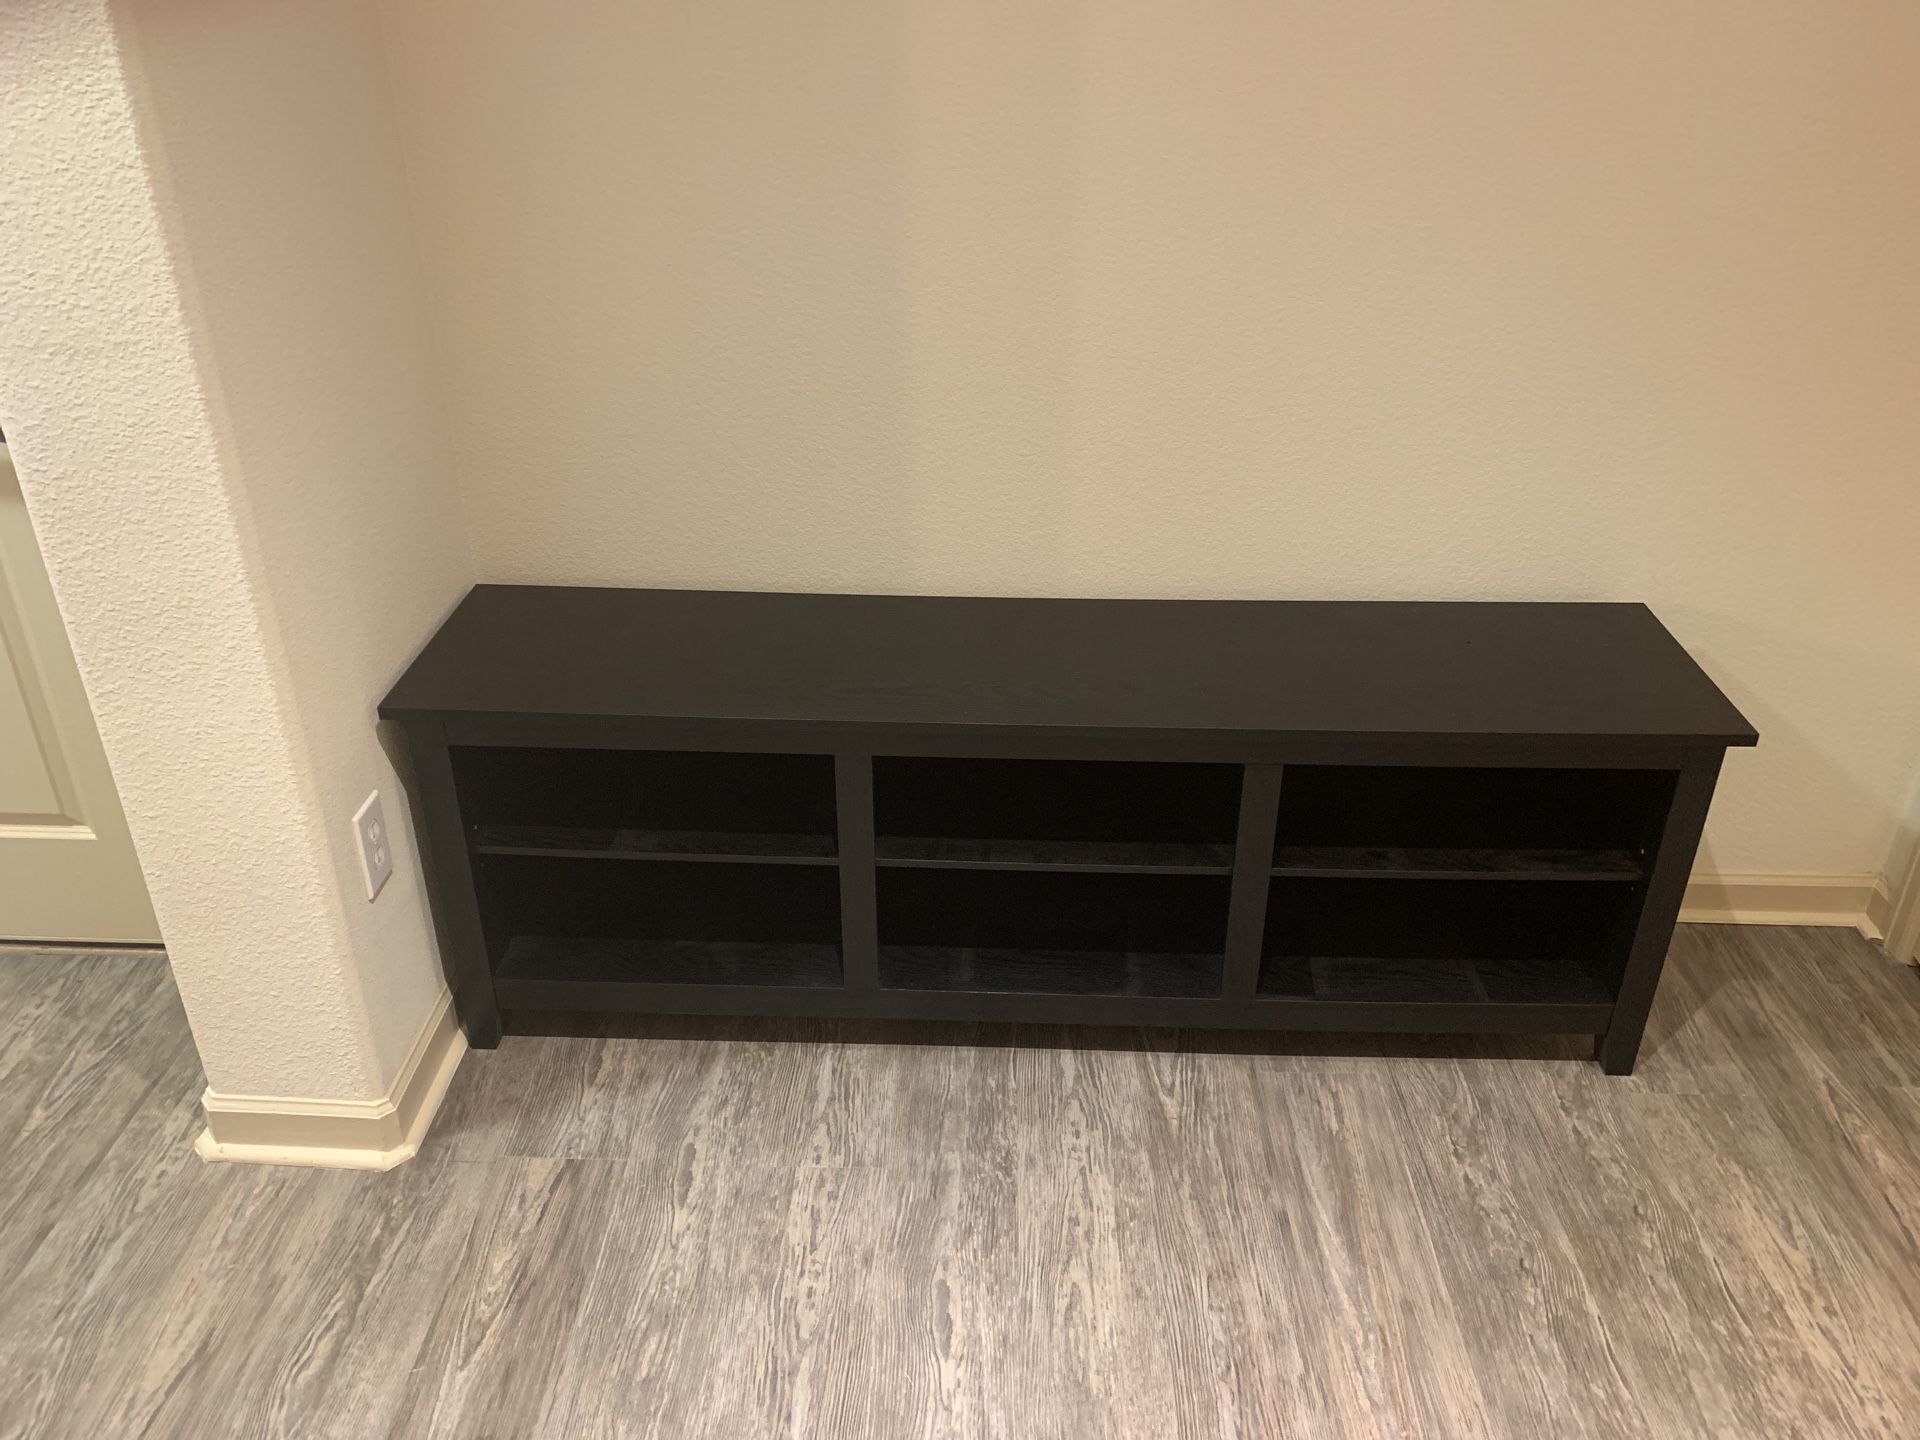 WE Furniture 70" Black Wood TV Stand Media Console